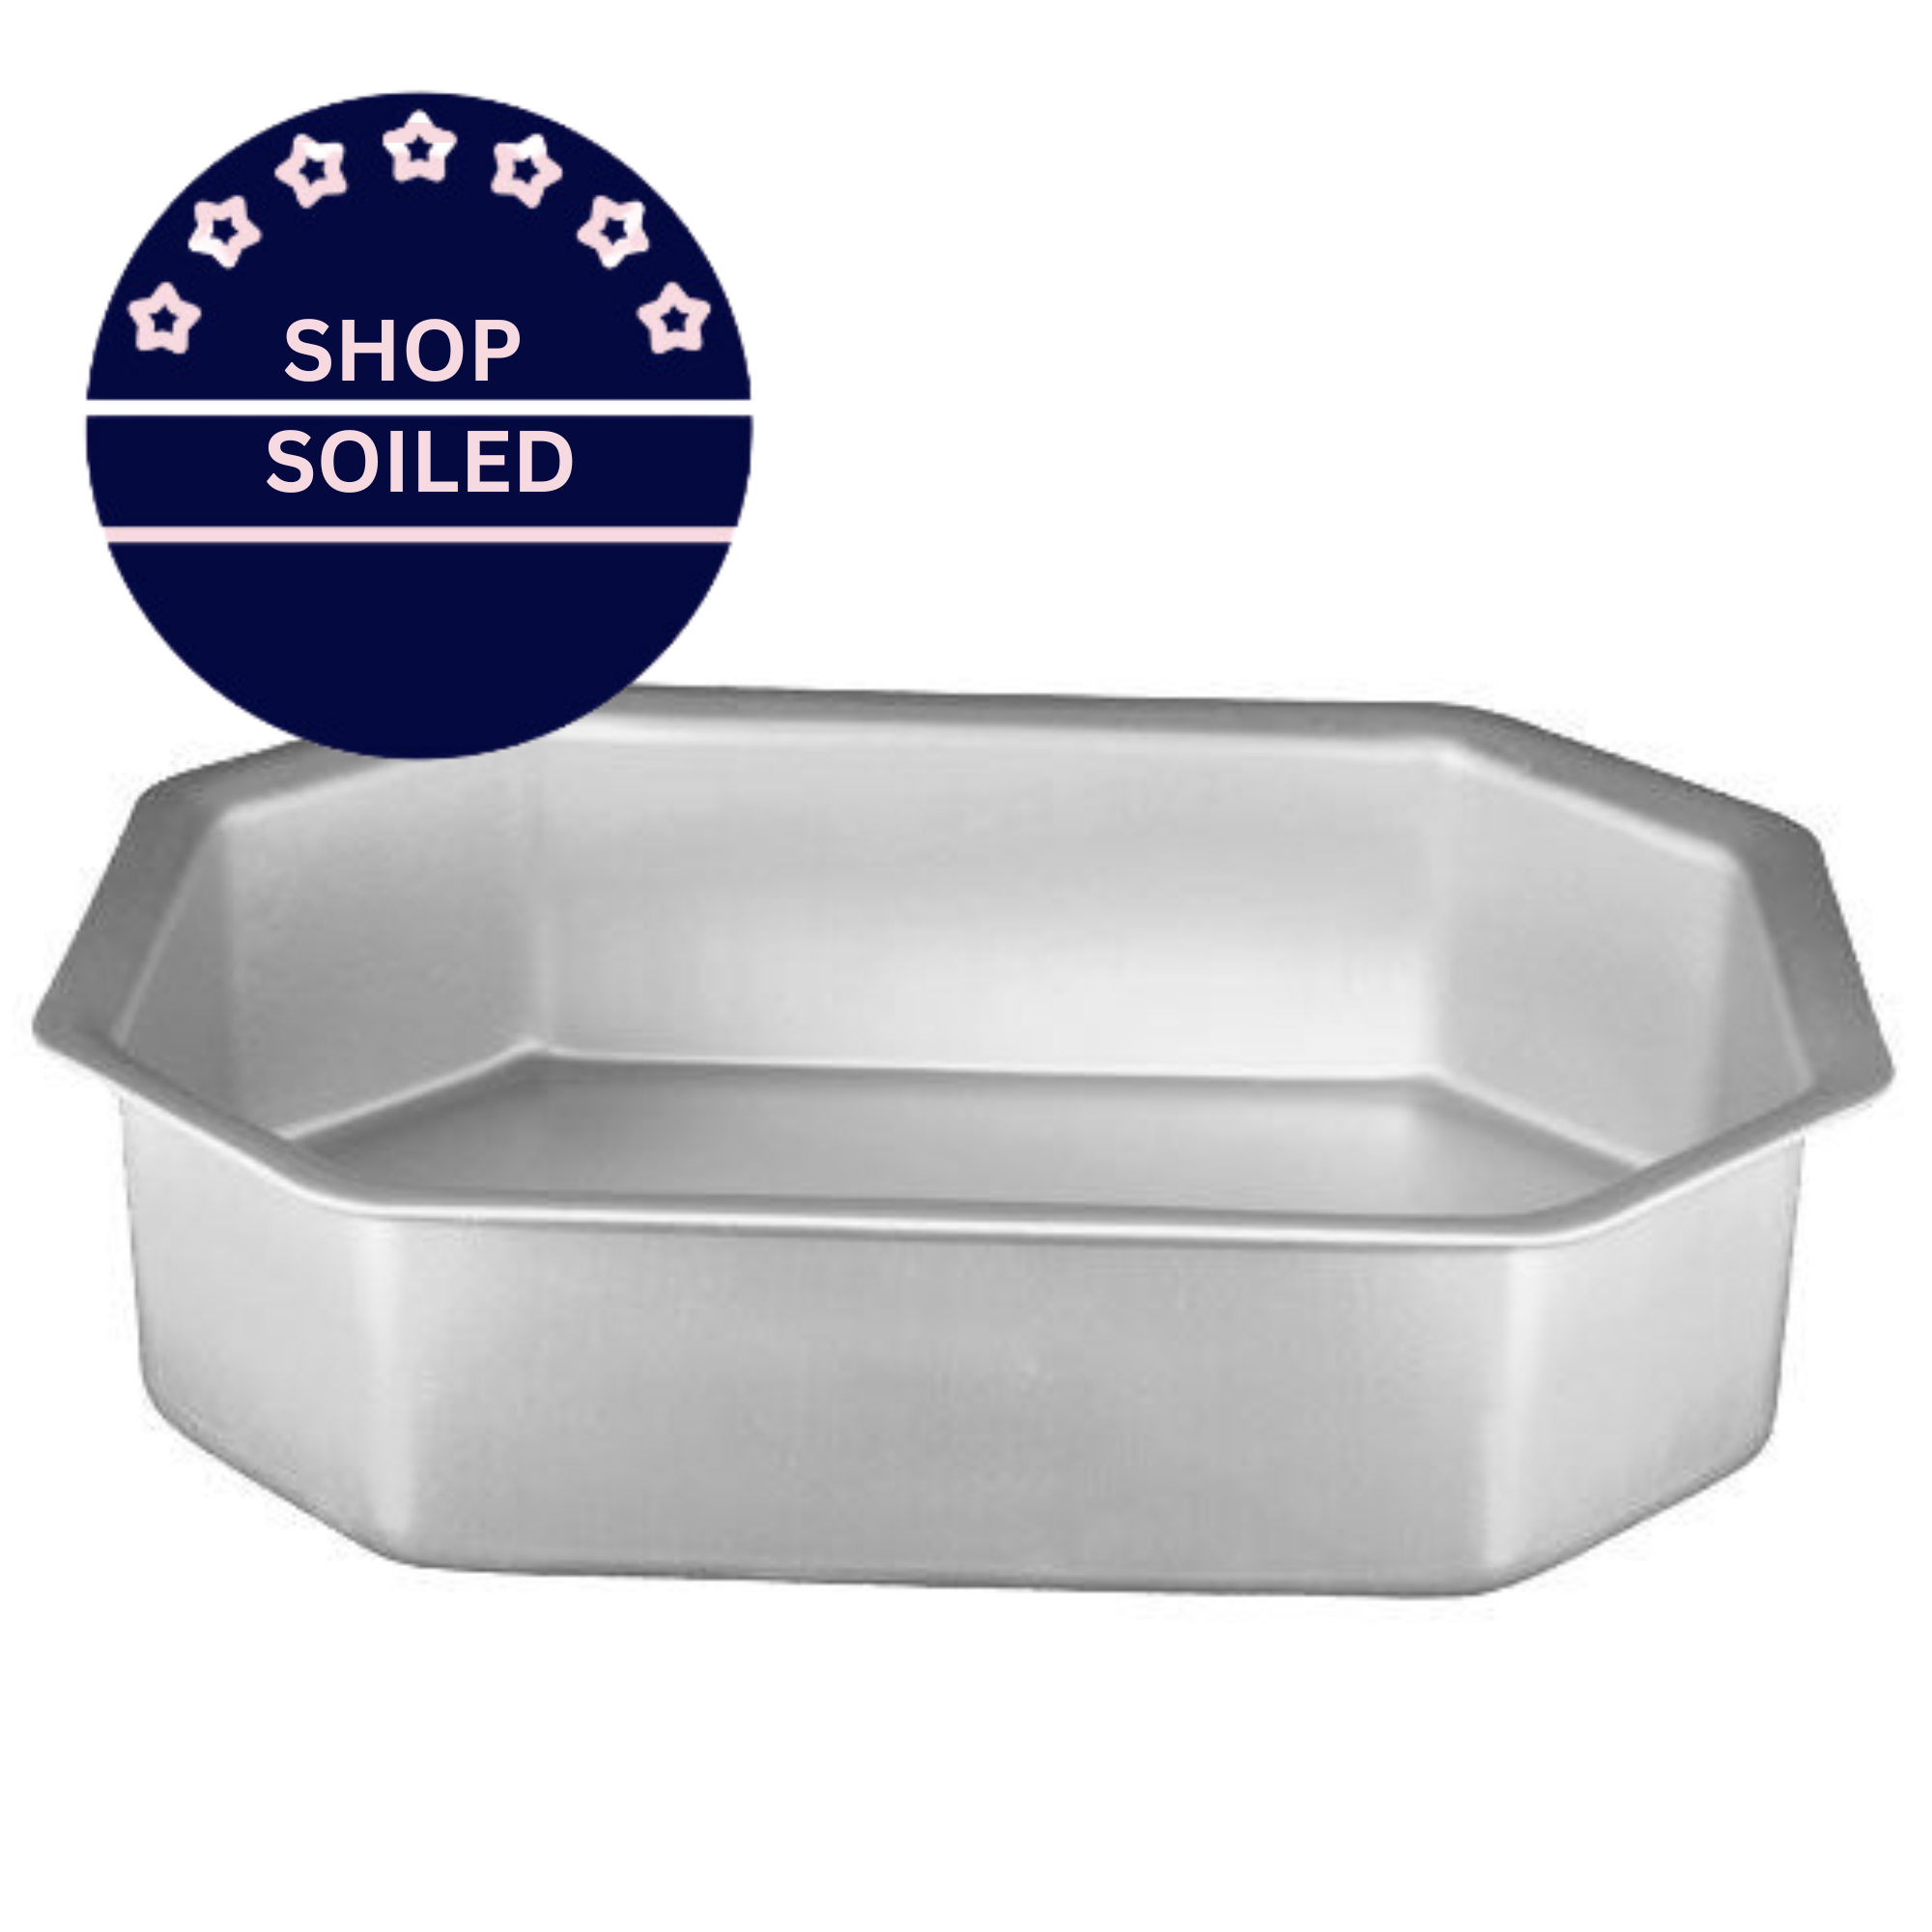 SHOP SOILED - Fat Daddio's from Silverwood Professional Silver Anodised Baking Tin Pan - Corner Cut Rectangle - 15" x 12" x 3"